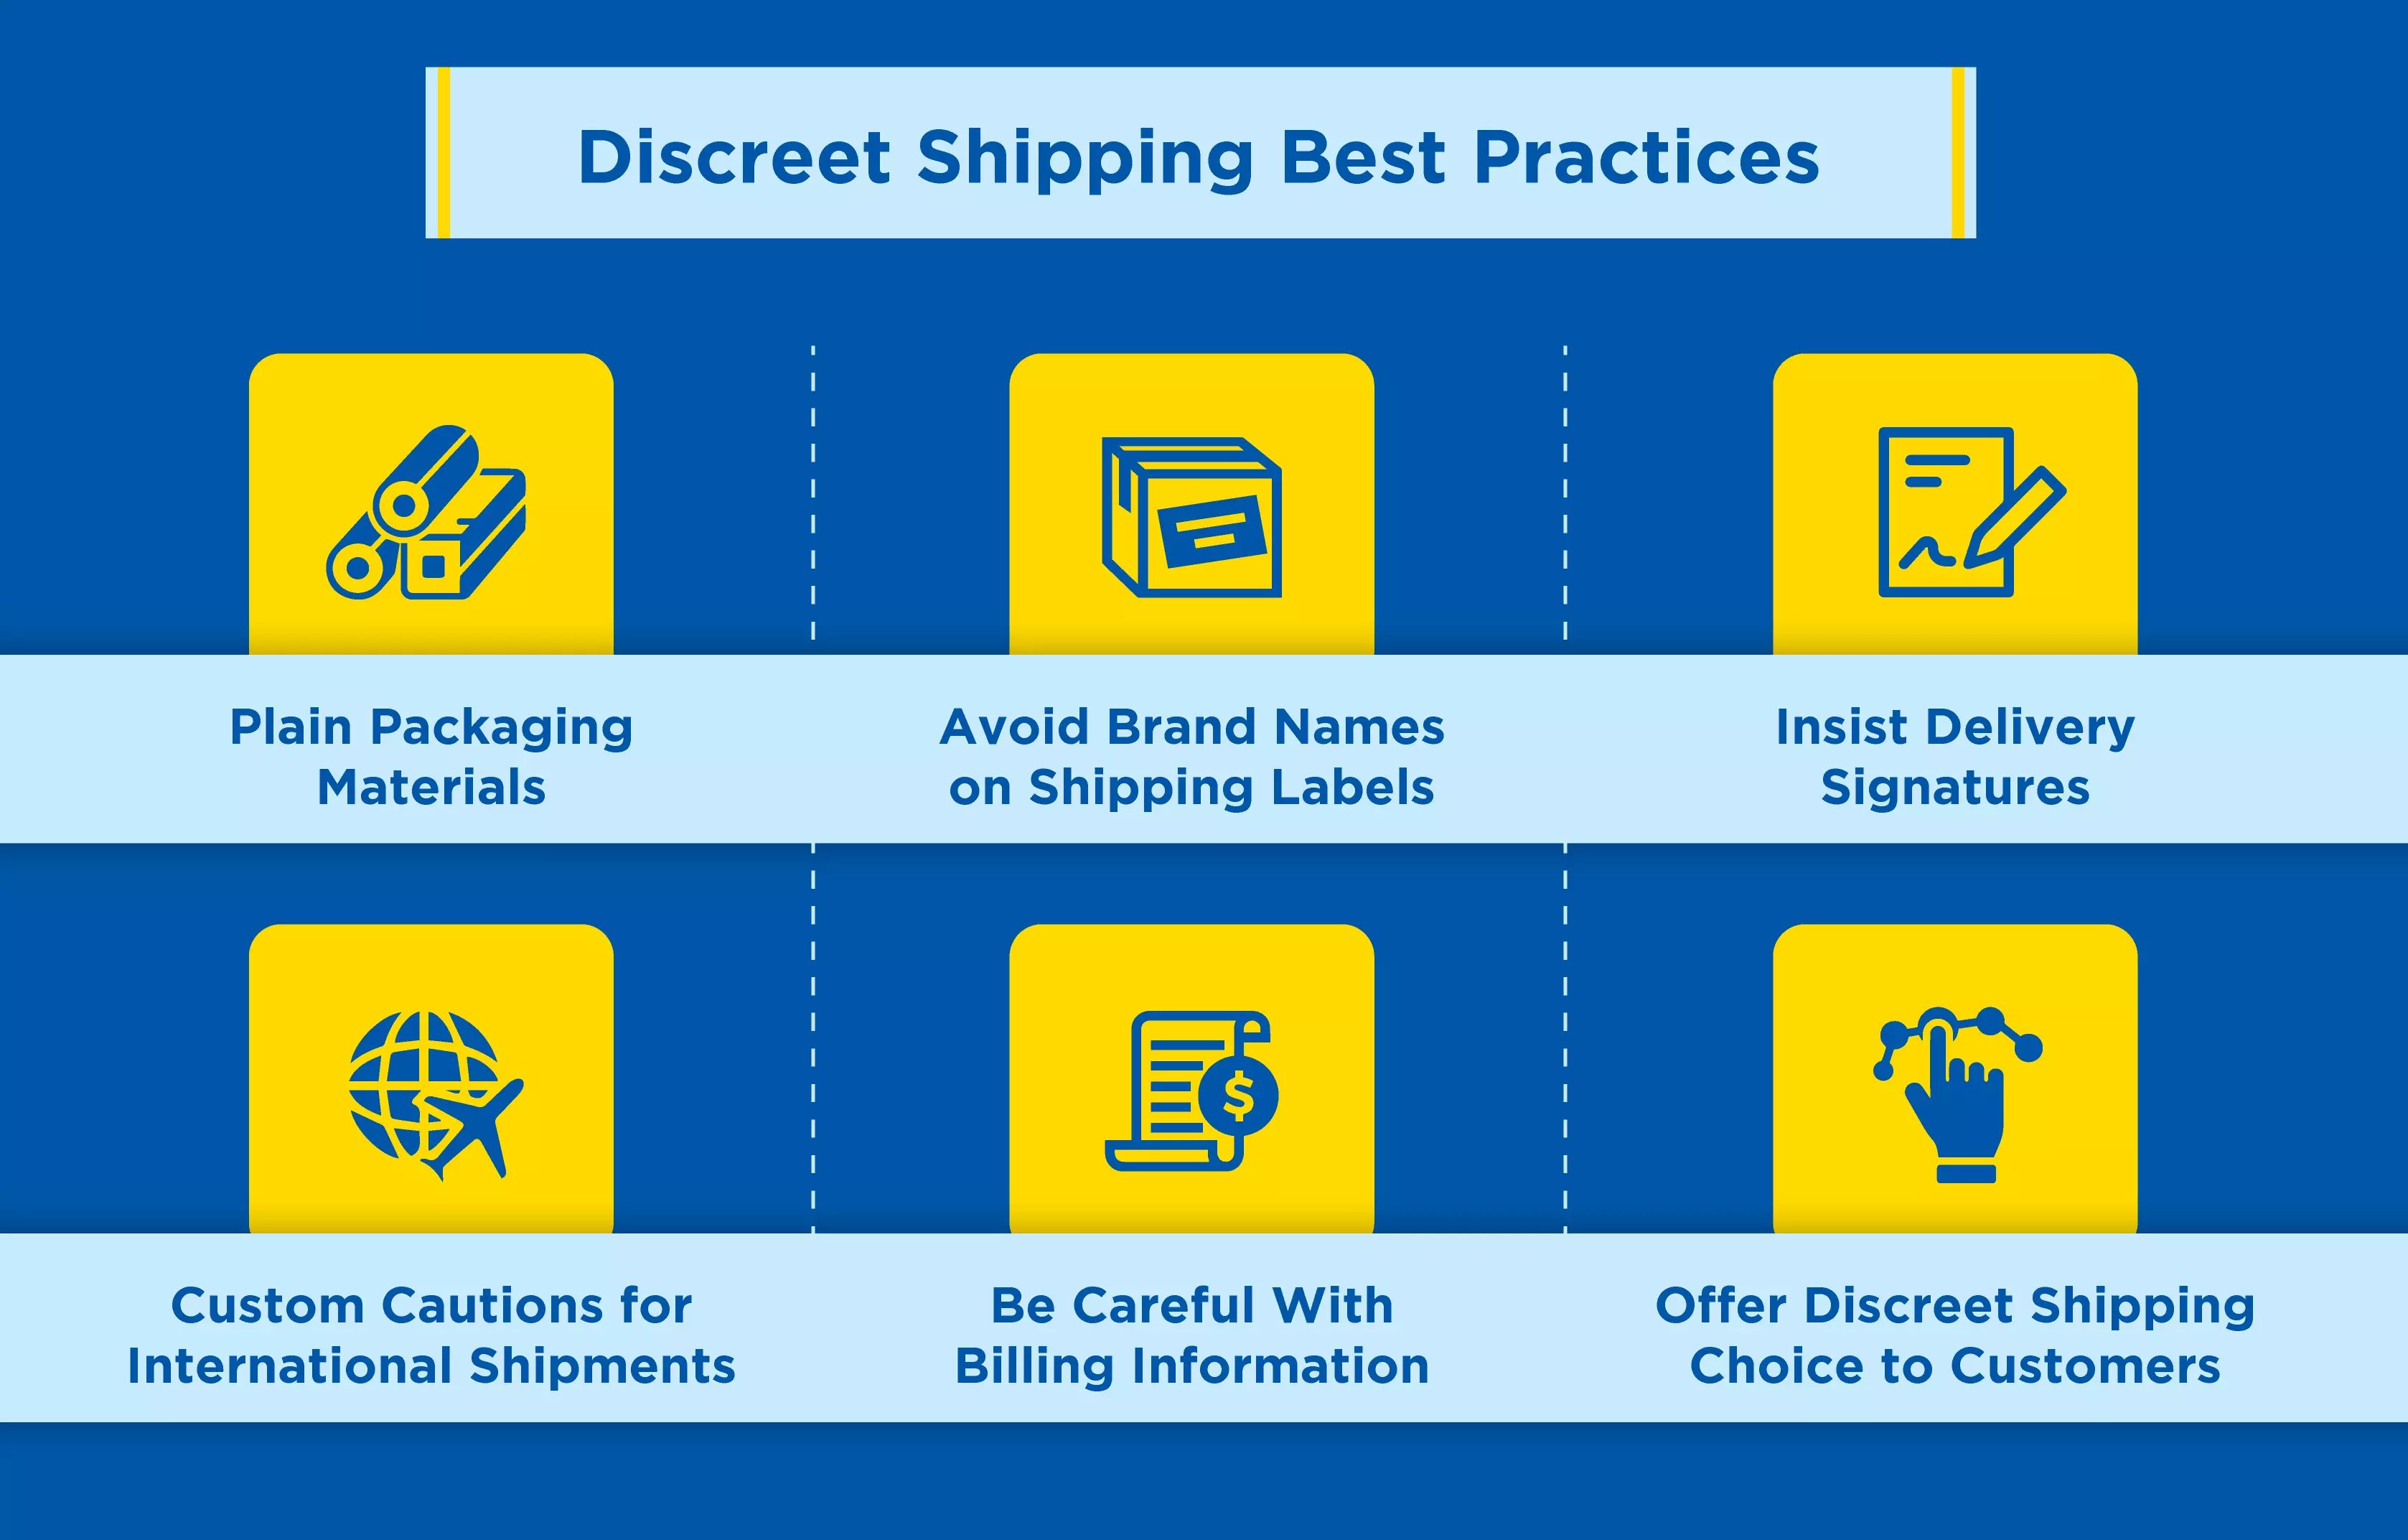 Discreet Shipping Best Practices